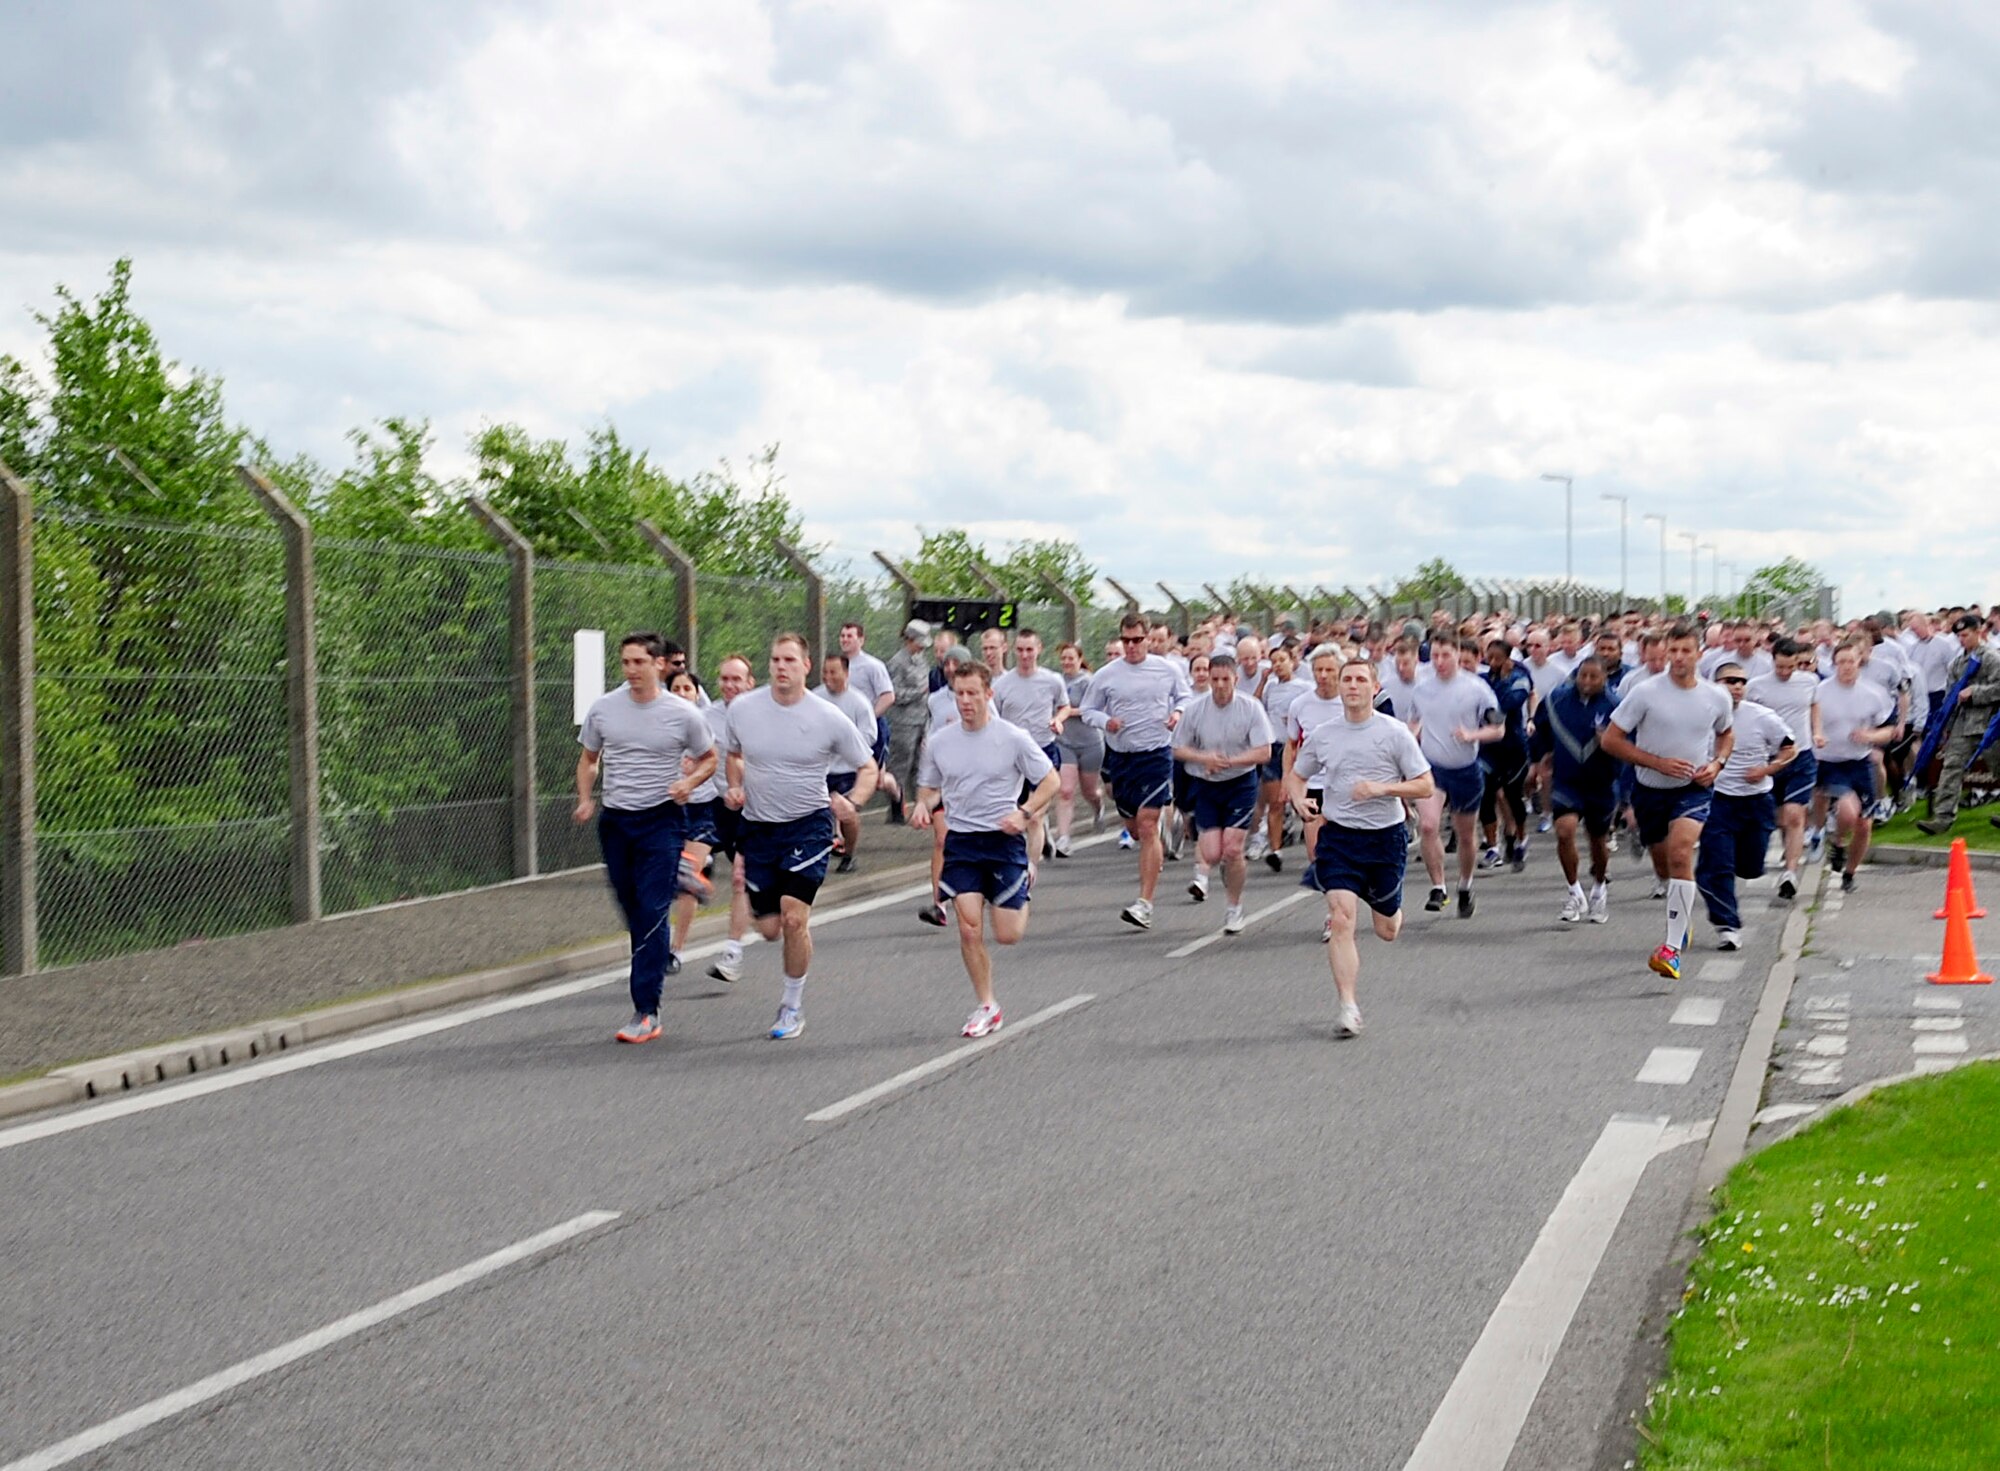 RAF MILDENHALL, England – Airmen begin the Team Mildenhall 5K run here May 11, 2012. The 100th Air Refueling Wing hosts a monthly 5K to help promote fitness and camaraderie. (U.S. Air Force photo/Senior Airman Ethan Morgan)